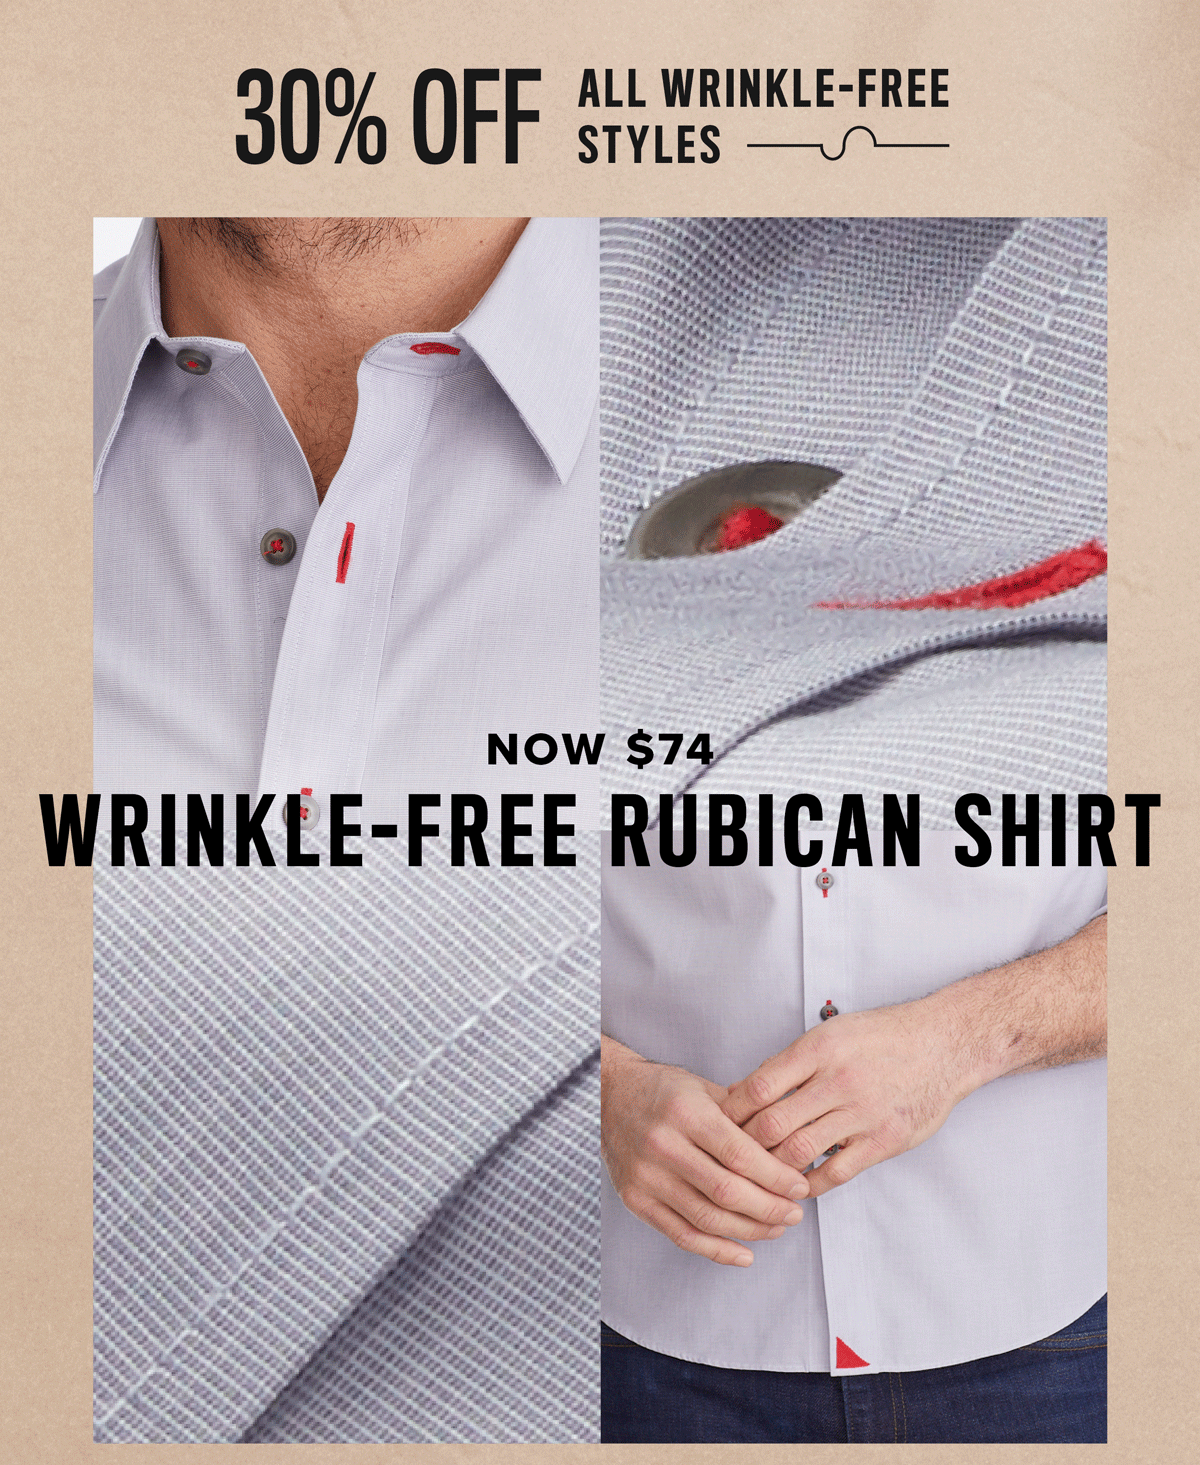 Now \\$74 Wrinkle-Free Rubican Shirts